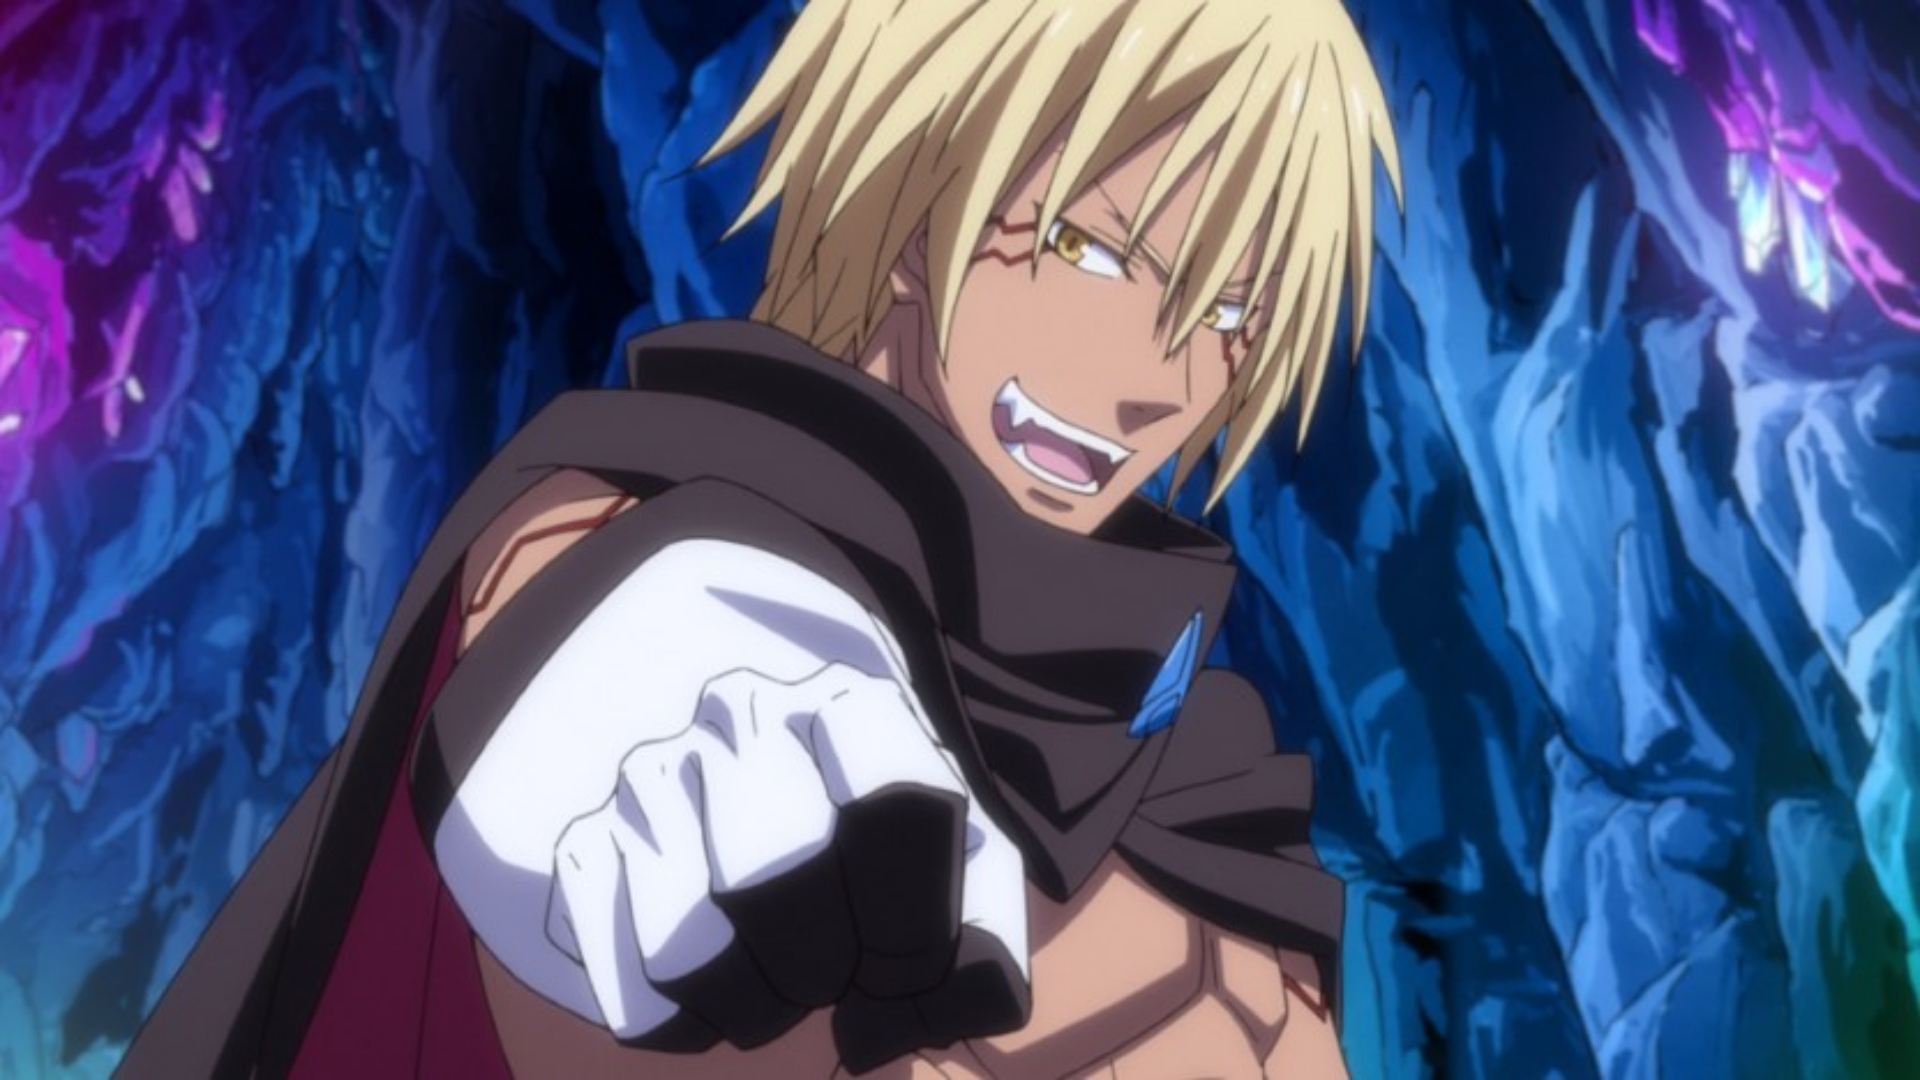 That Time I Got Reincarnated as a Slime Episode 37 Preview